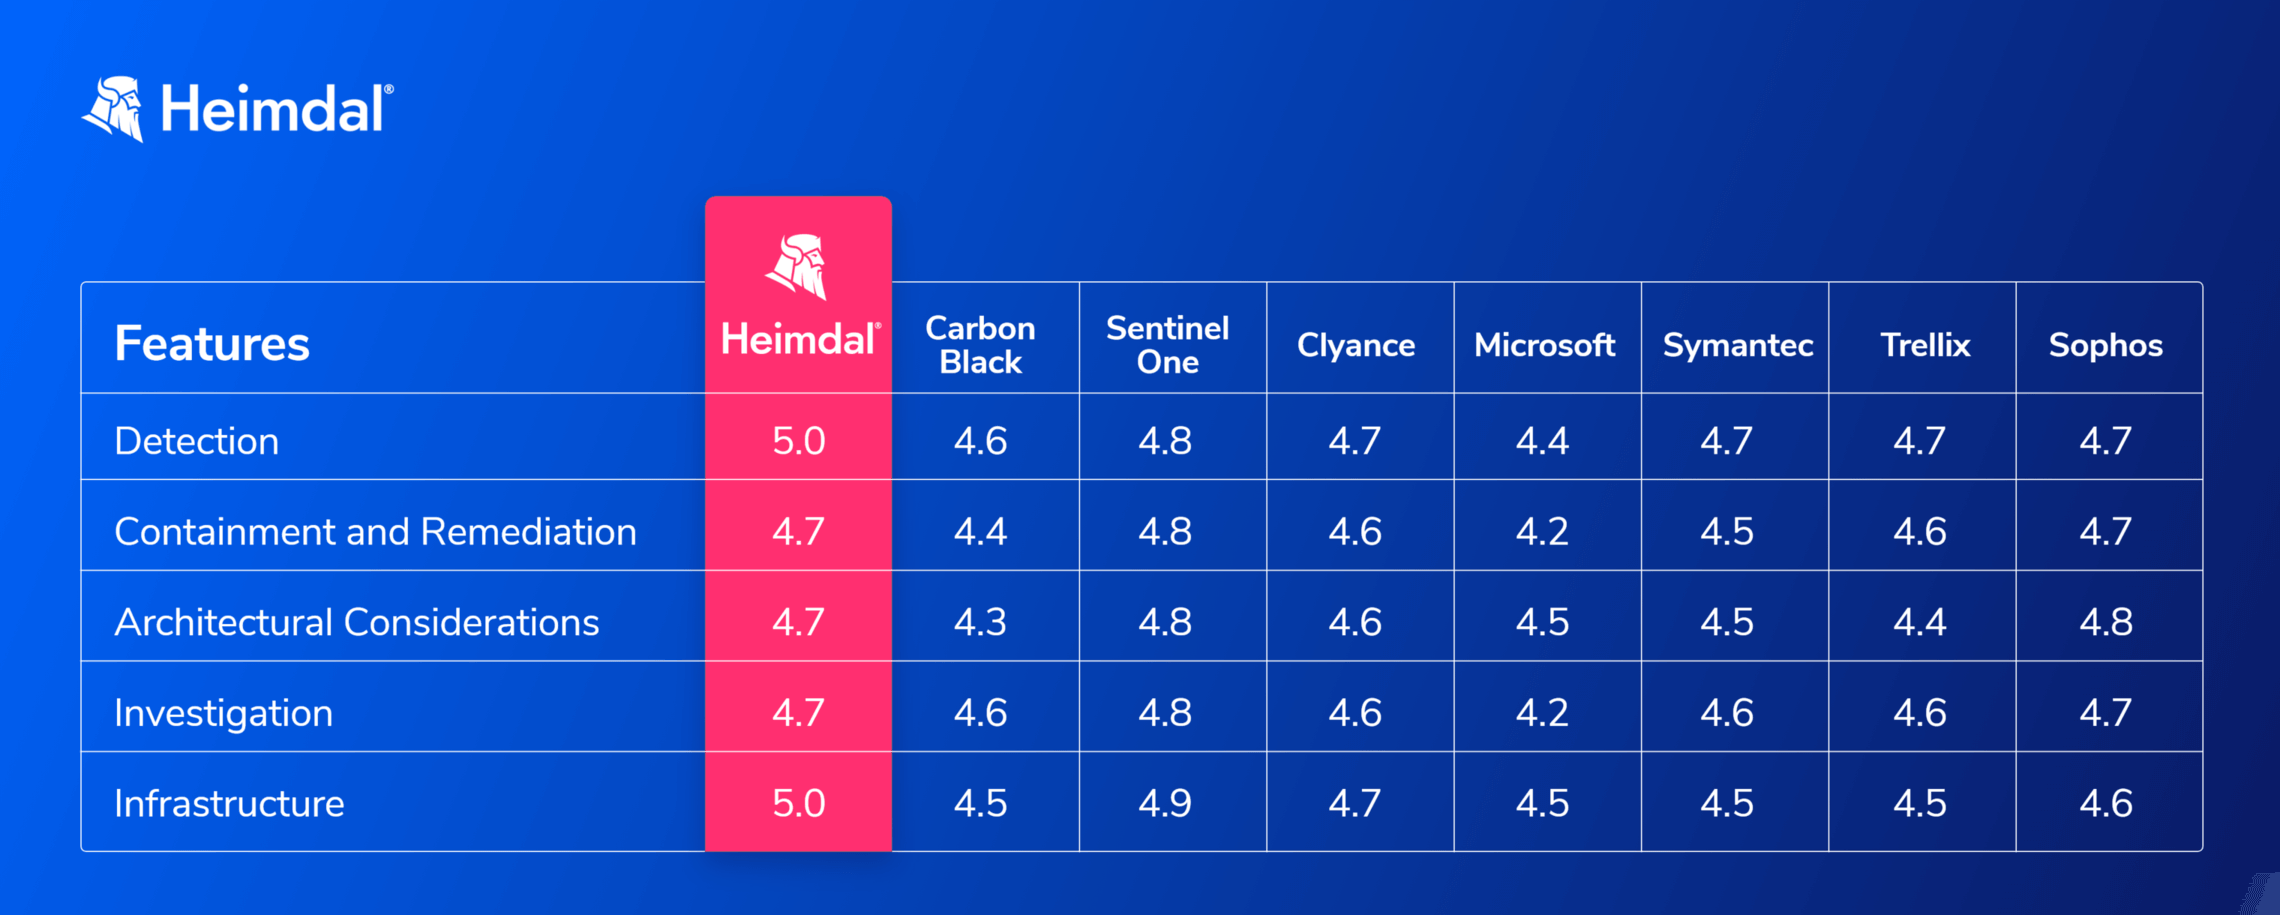 A feature comparison table looking at detection, containment and remediation, architectural considerations, investigations and infrastructure - with Heimdal finishing on top for all 